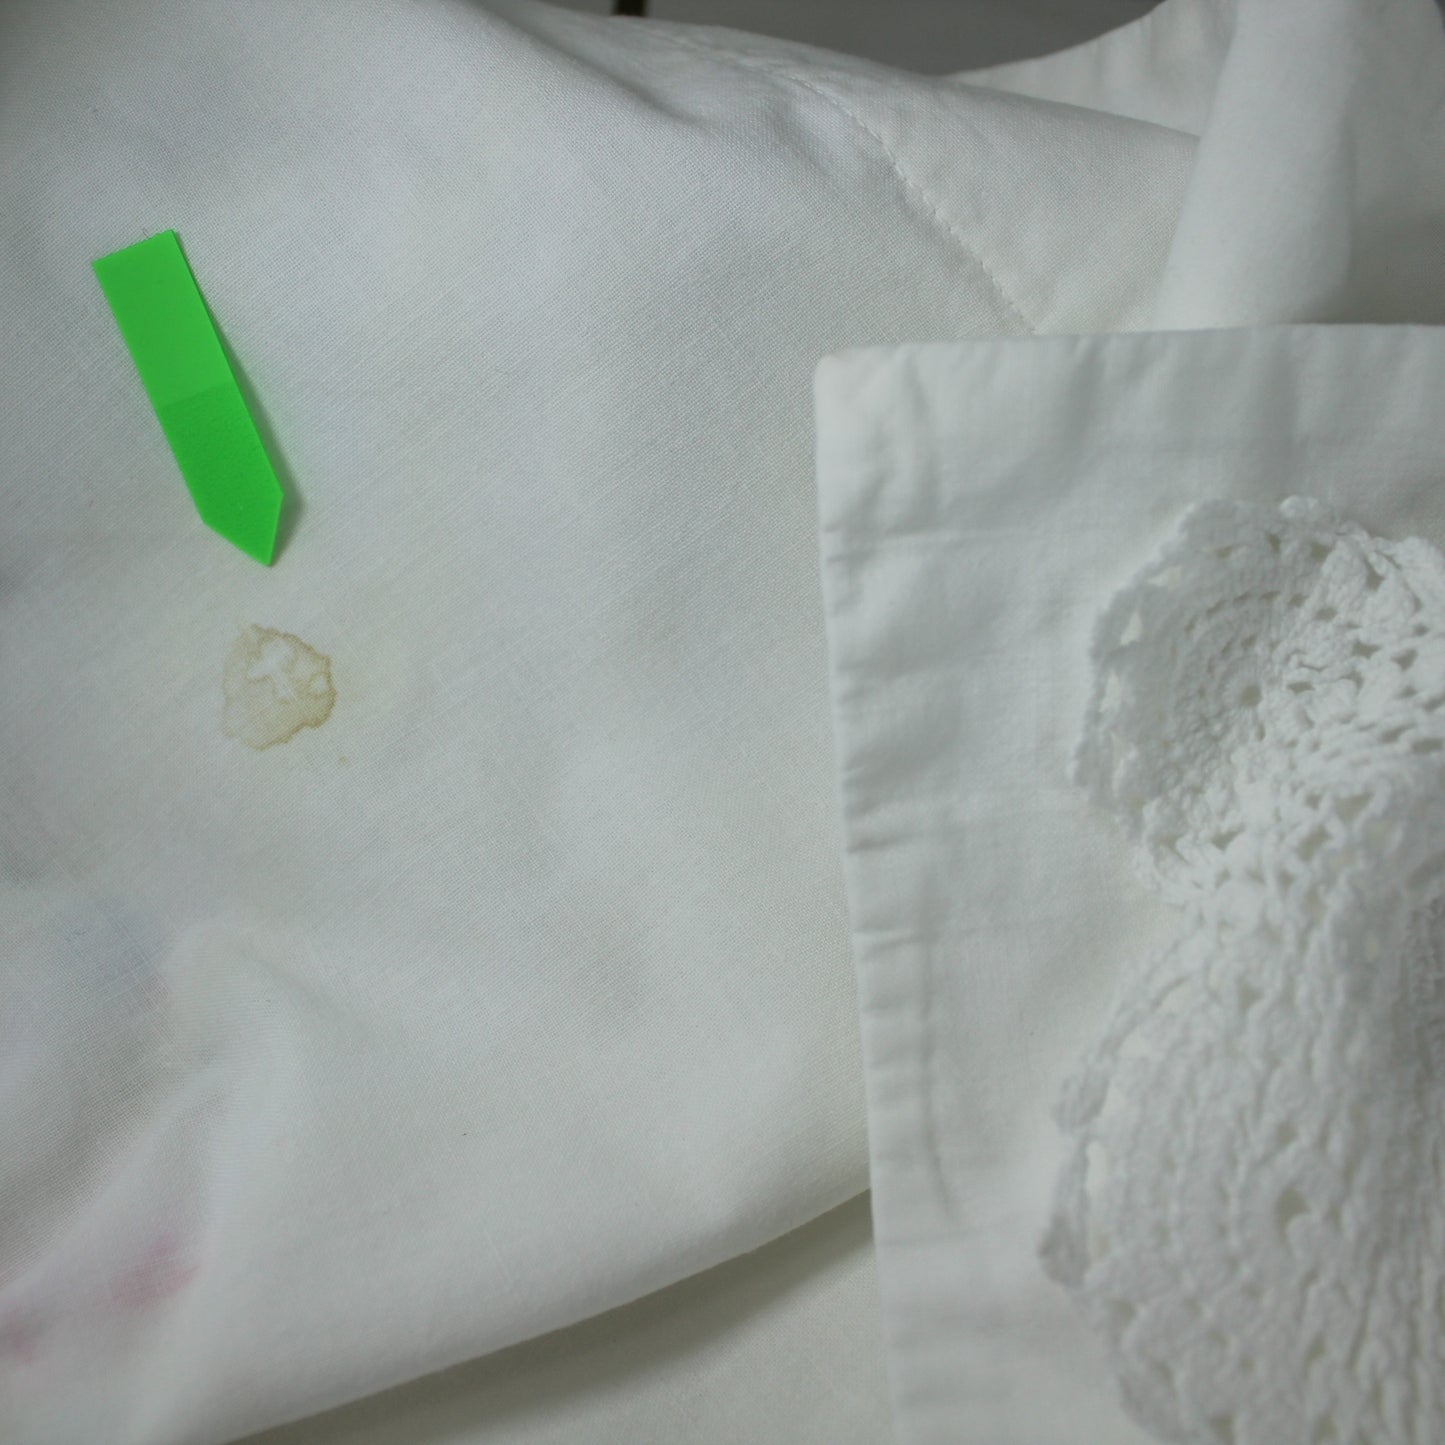 White Cotton Coverlet Matching Pillow Shams Appliqued Crosstitch Pastels note 1 stain reverse of 1 sham